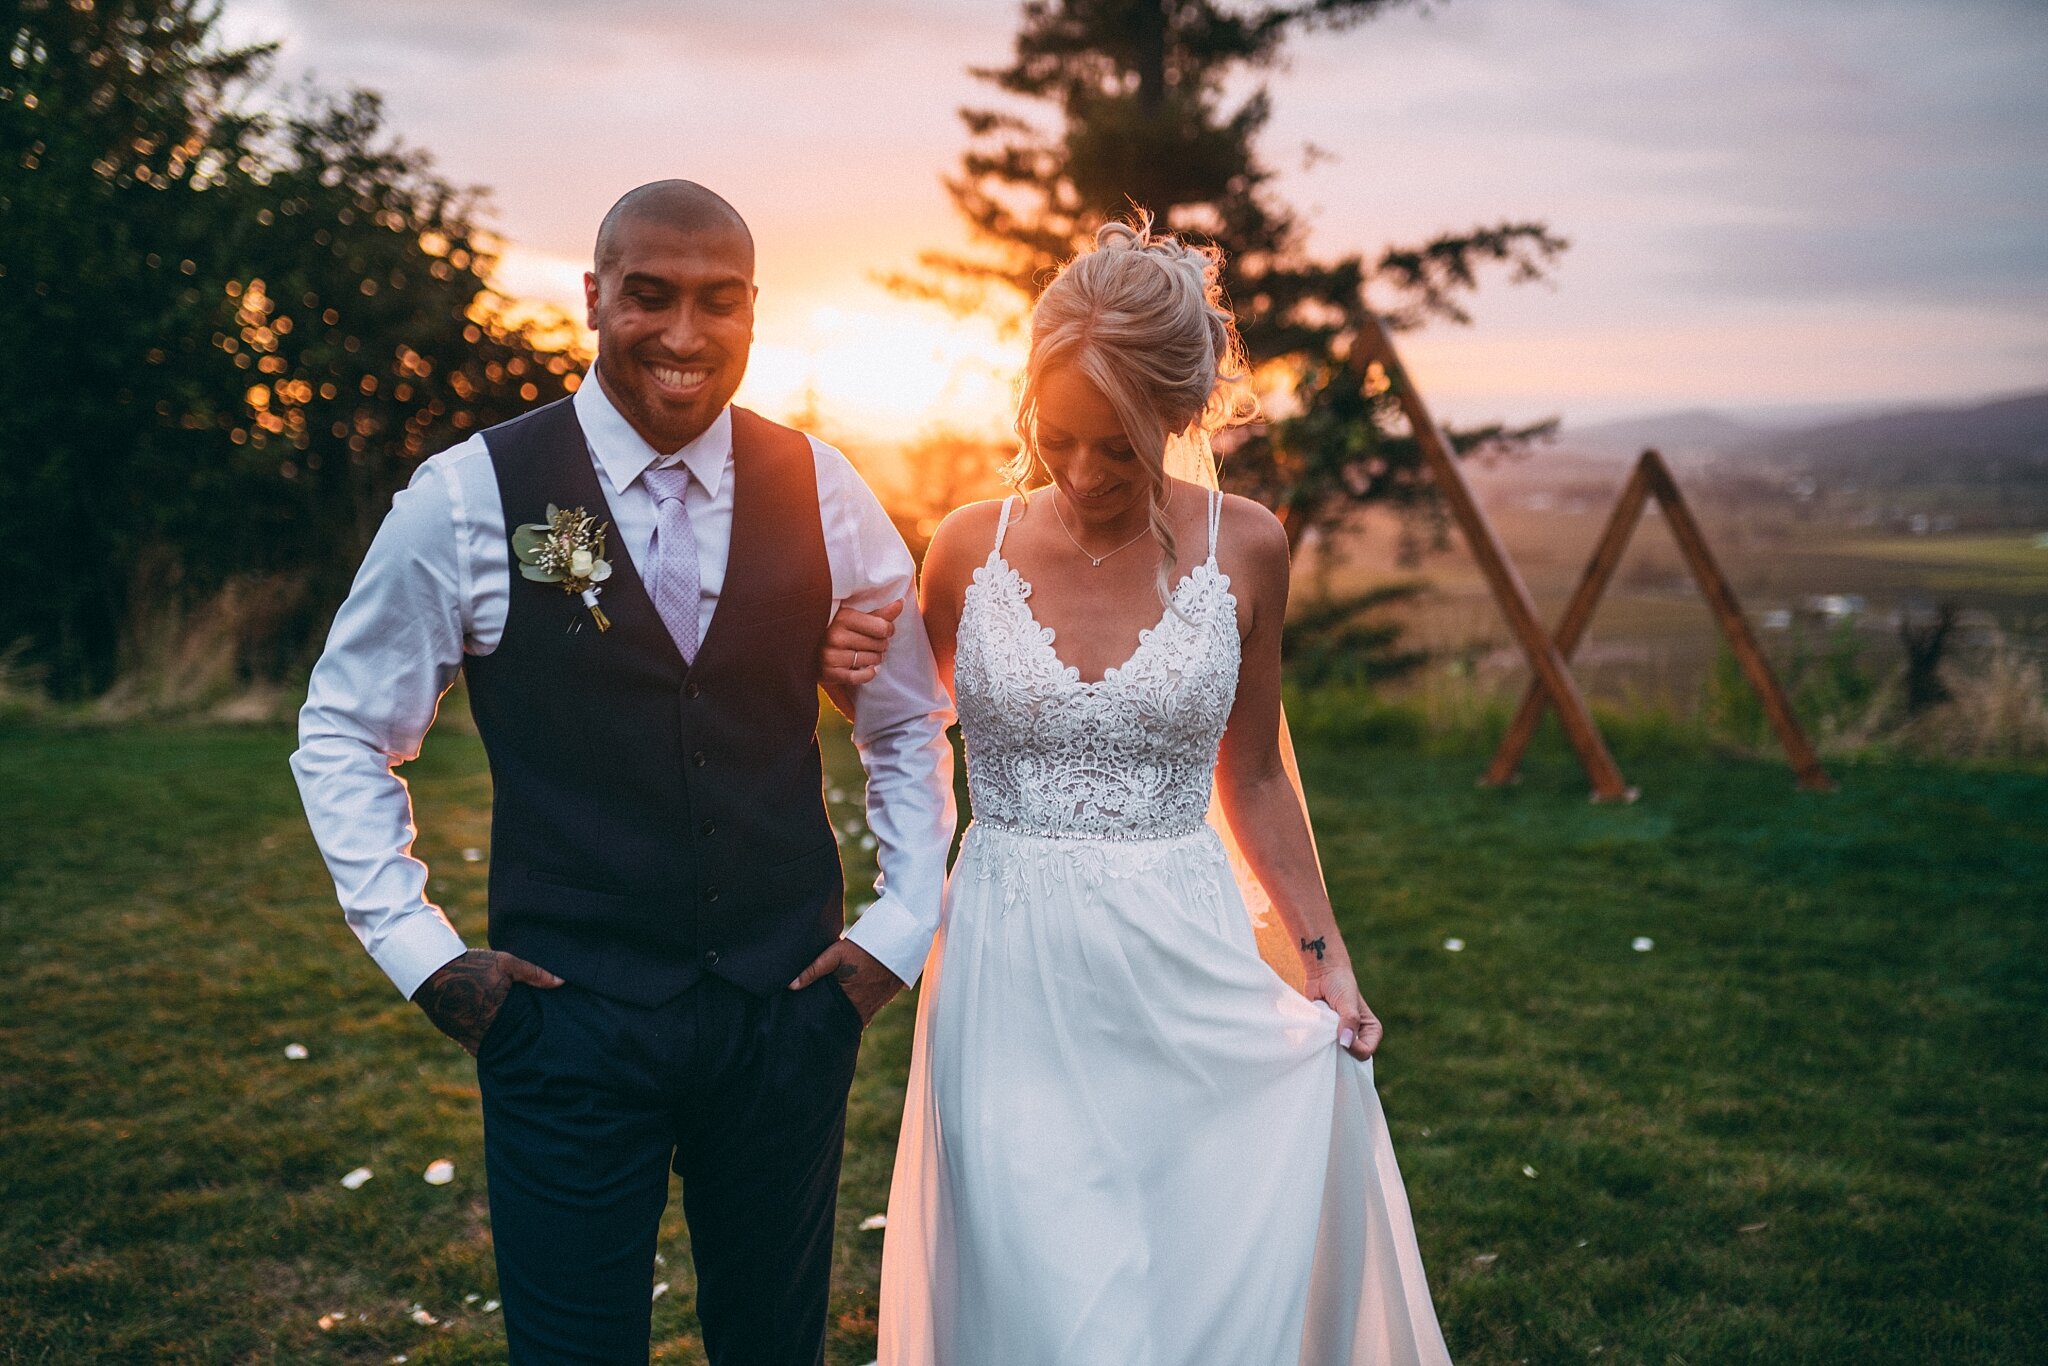 bride holding onto grooms arm for support at sunset smiling